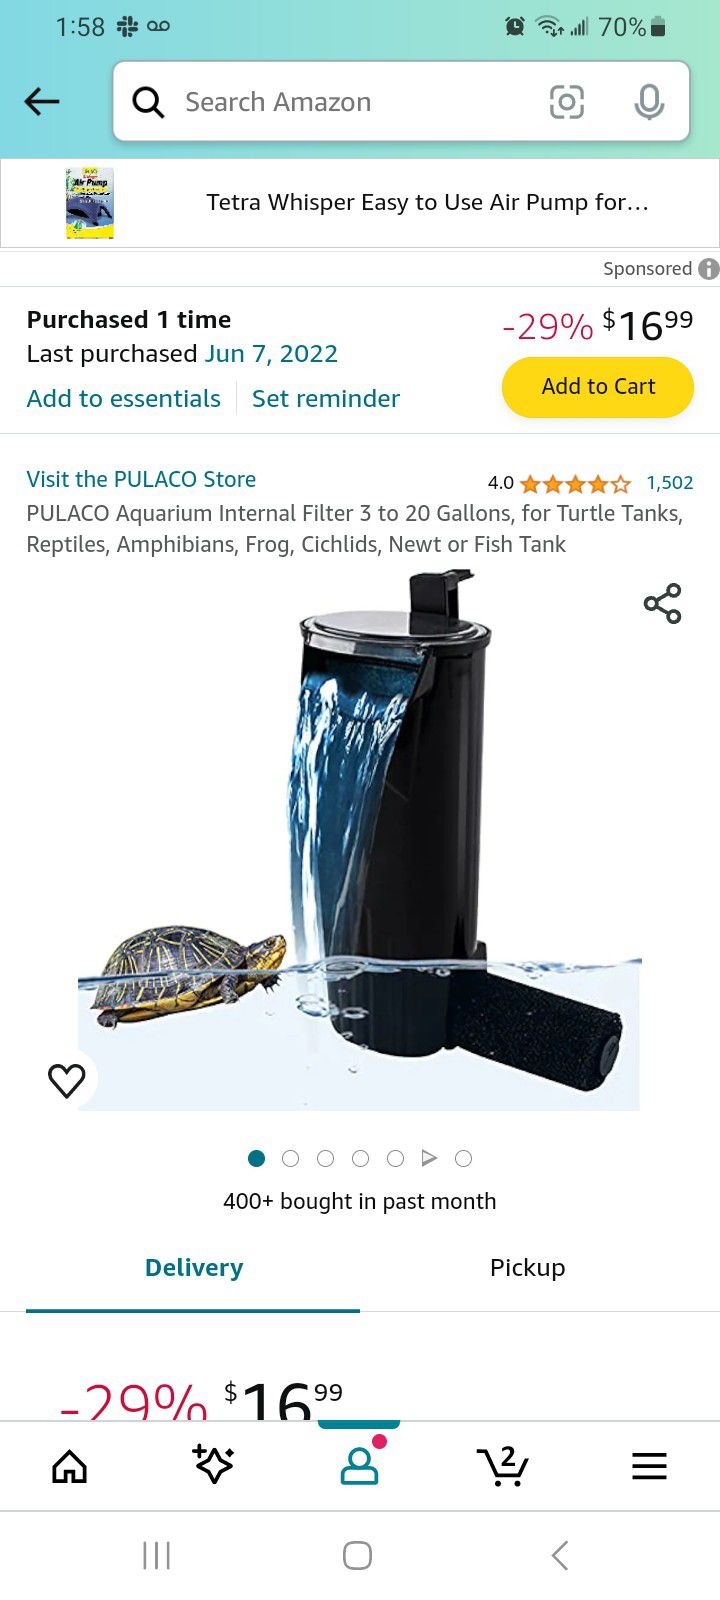 PULACO Aquarium Internal Filter 3 to 20 Gallons, for Turtle Tanks, Reptiles, Amphibians, Frog, Cichlids, Newt or Fish Tank
